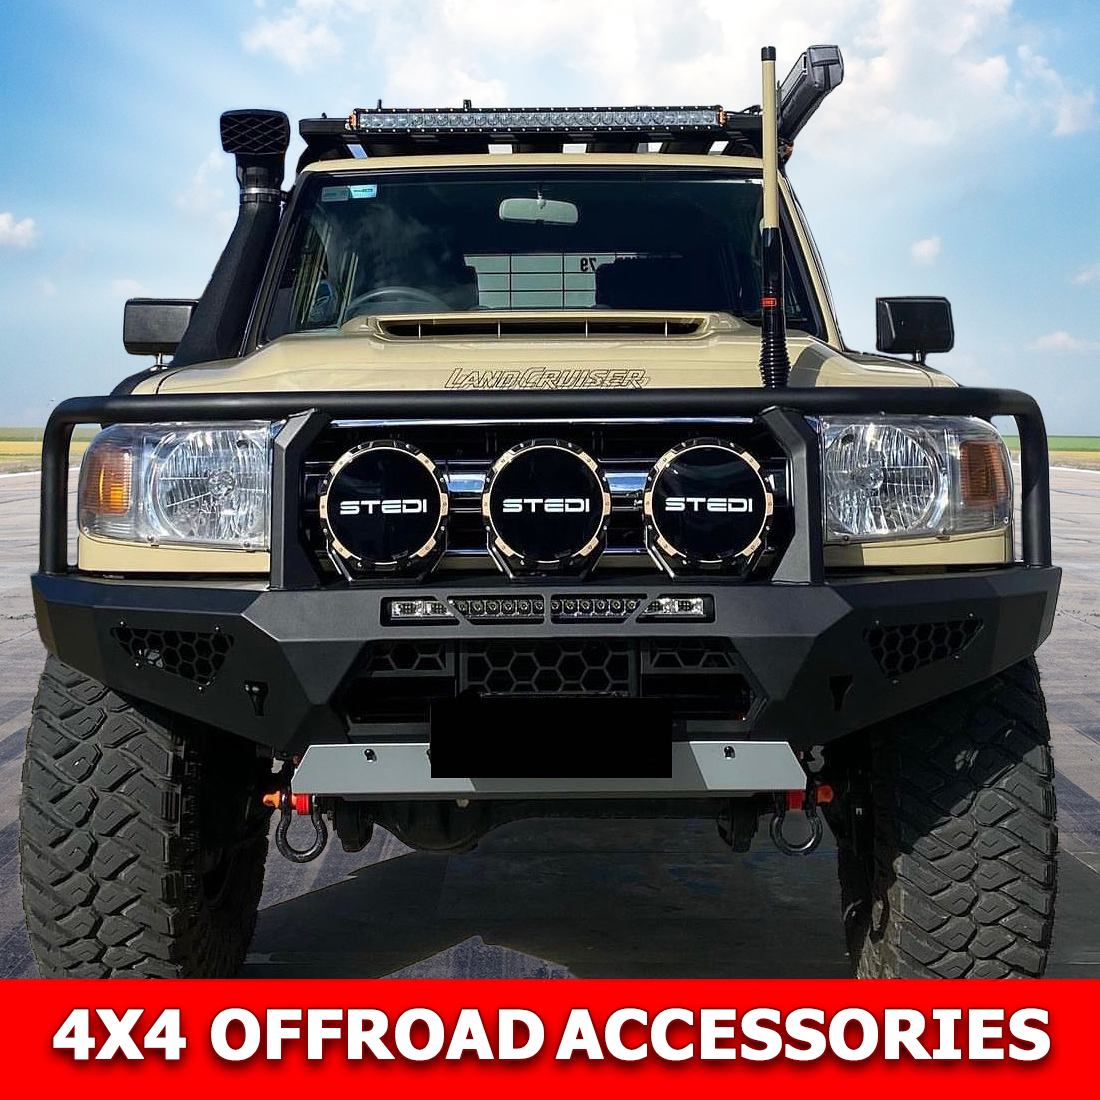 Playtime Auto Parts. Home of excellent 4x4 equipment.